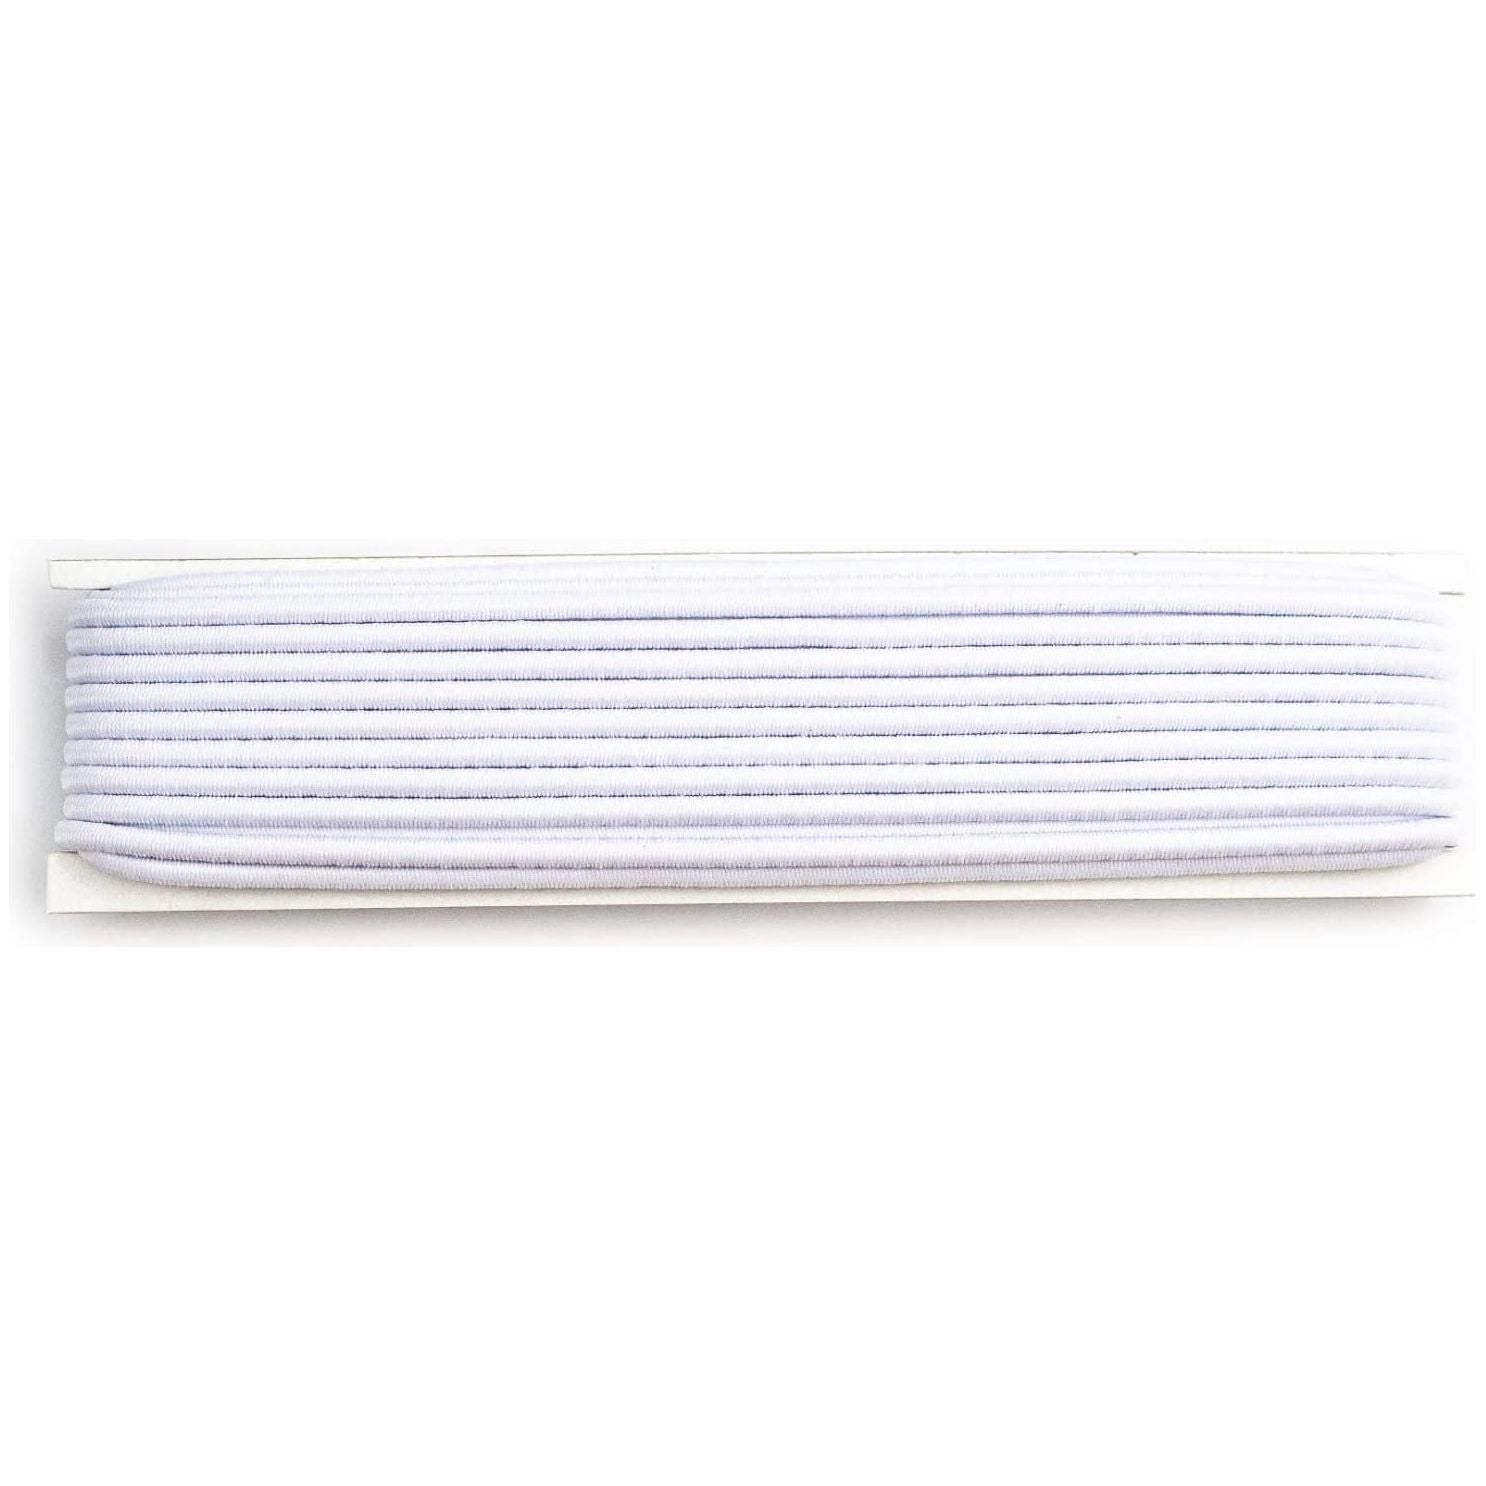 3mm Round Elastic Band, Stretch Strap Cord for Sewing and Crafting